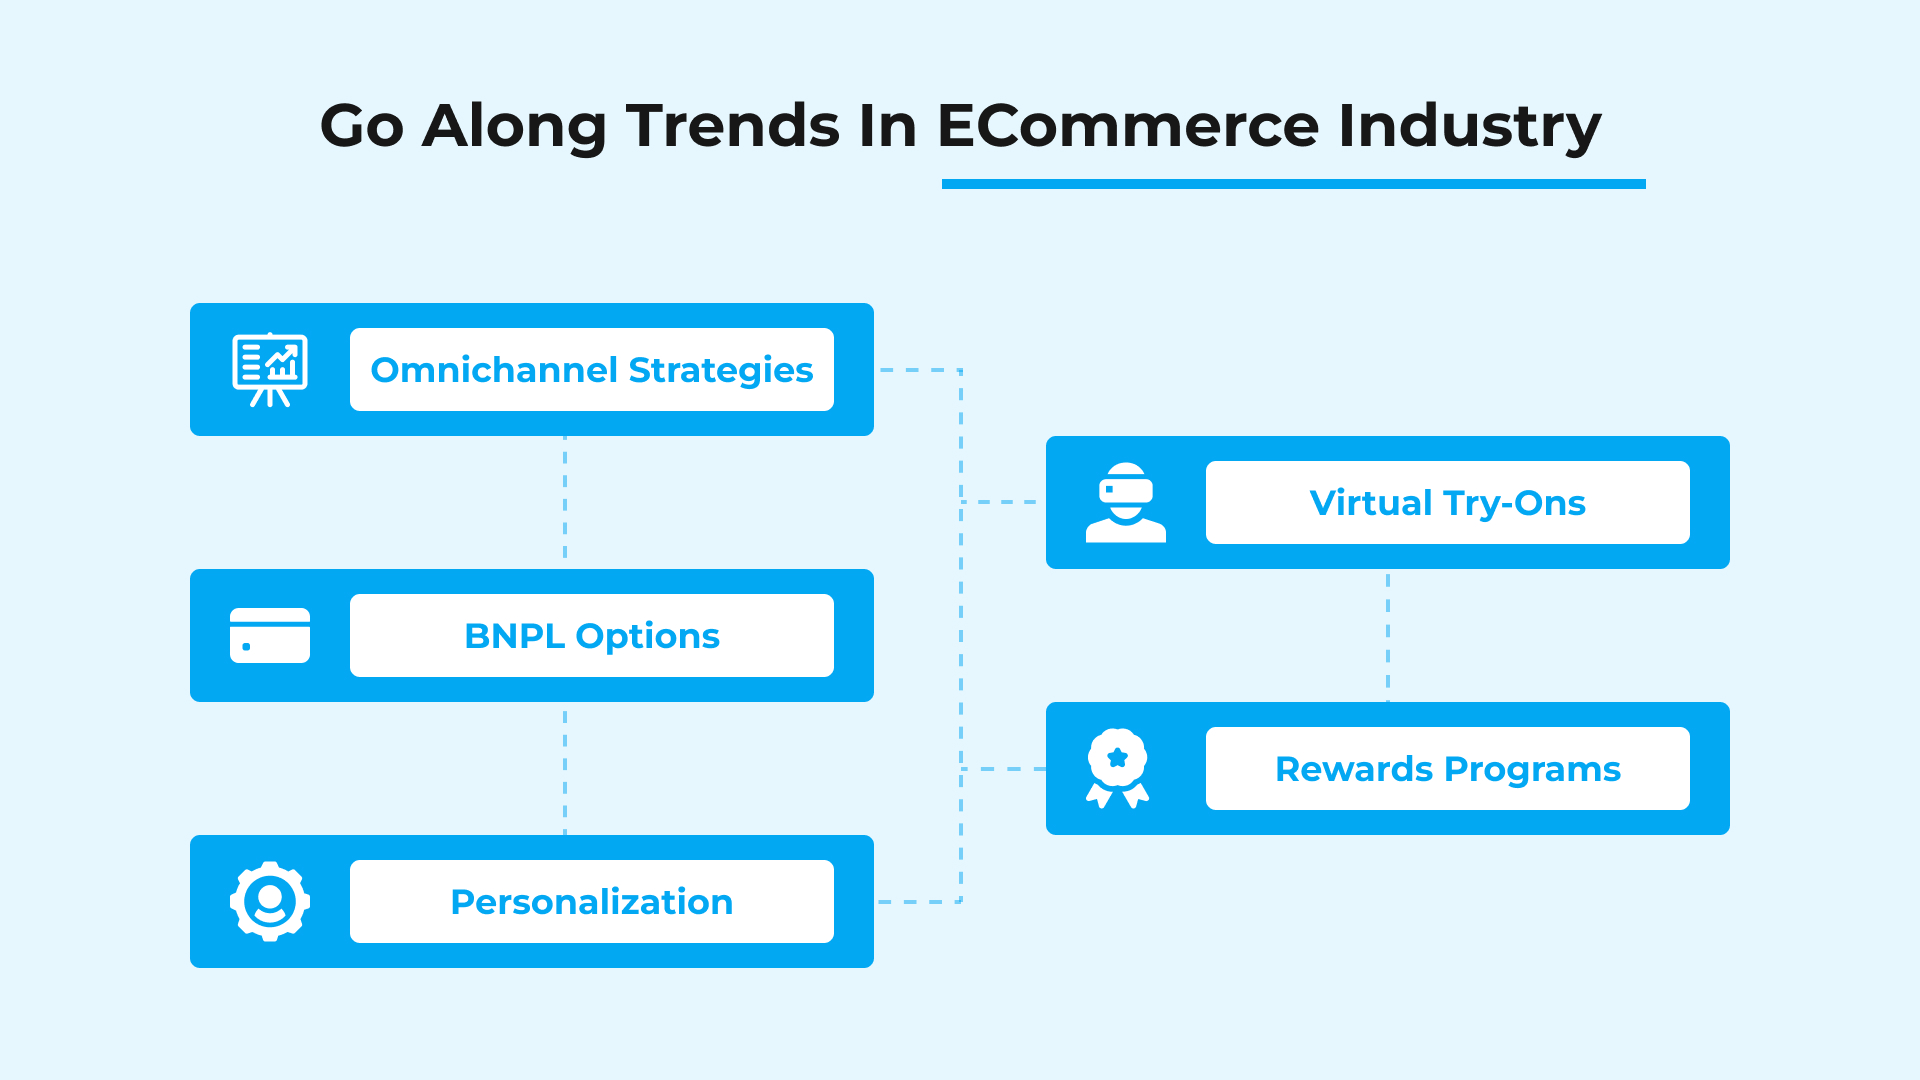 Go Along Trends in eCommerce Industry